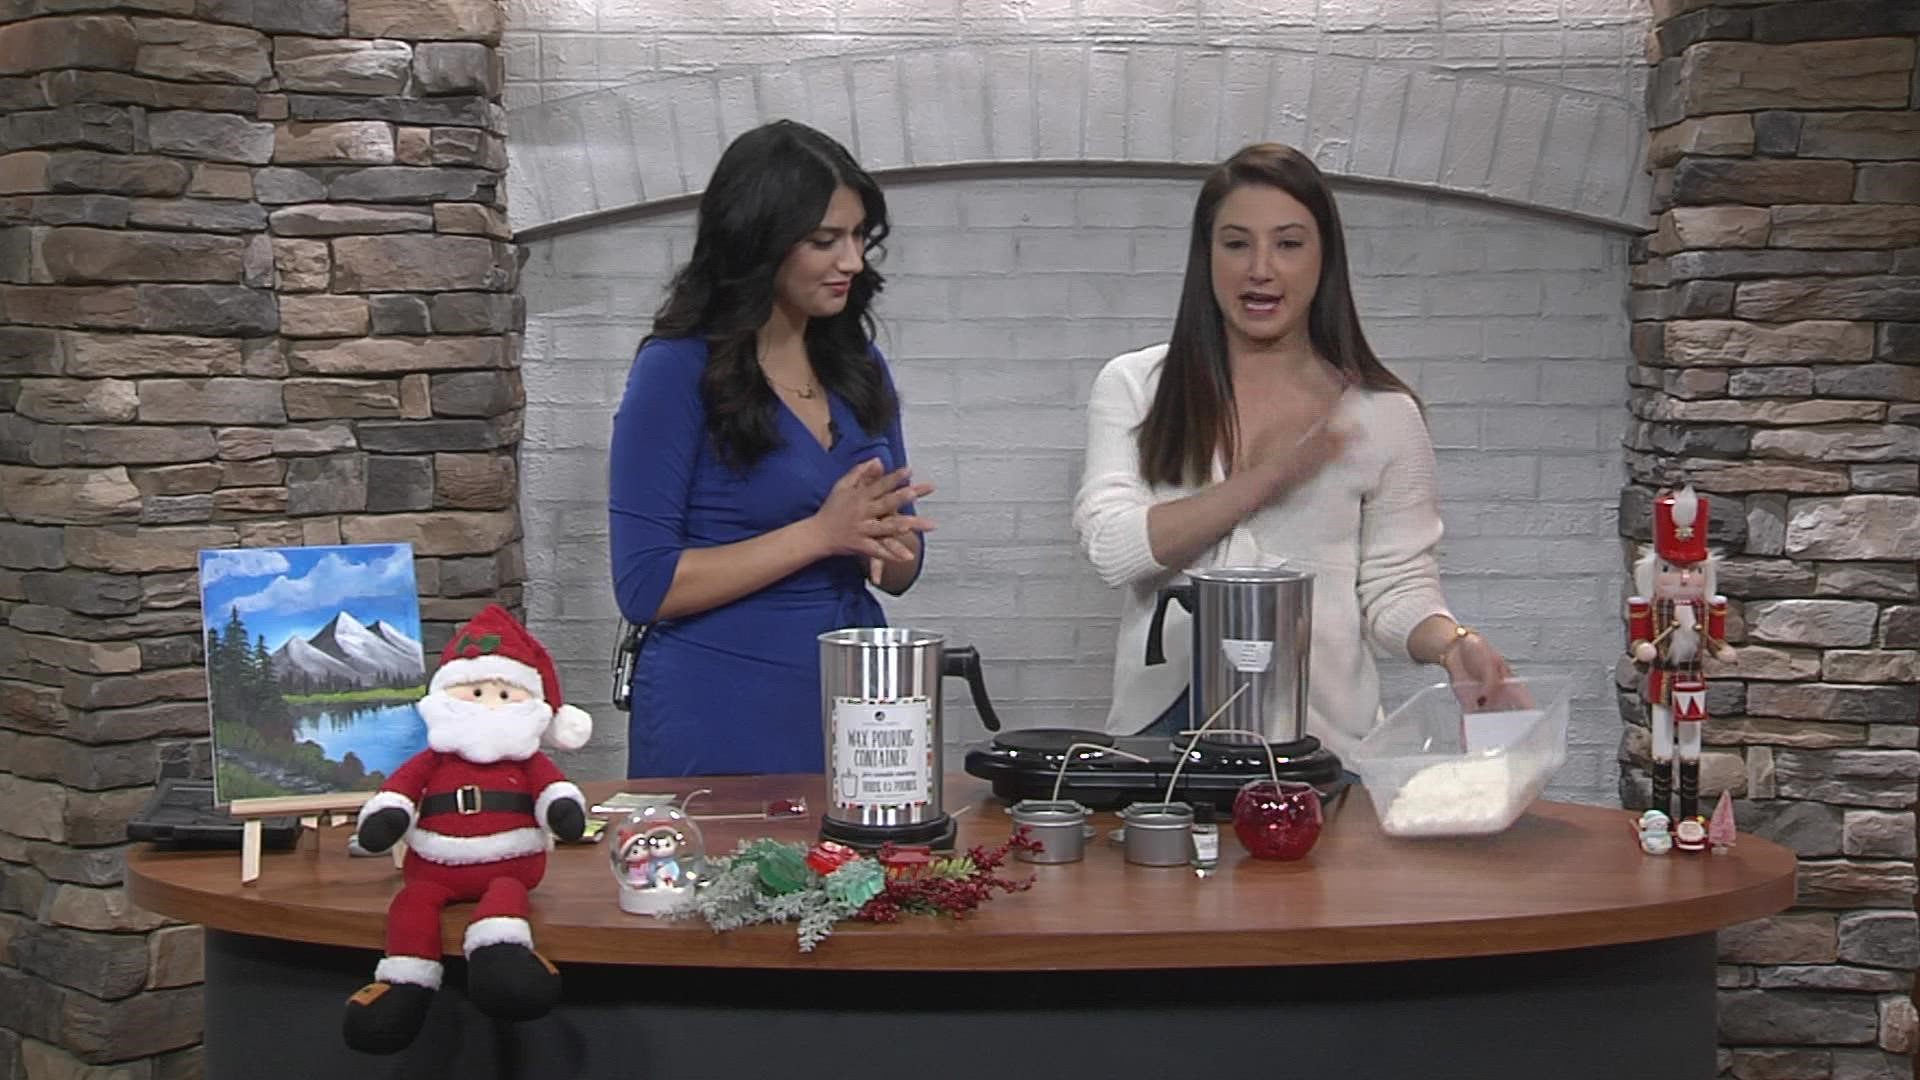 Cristina Von Goihman, founder of The Artisans Club in Knoxville, shows us how to make at-home candles.